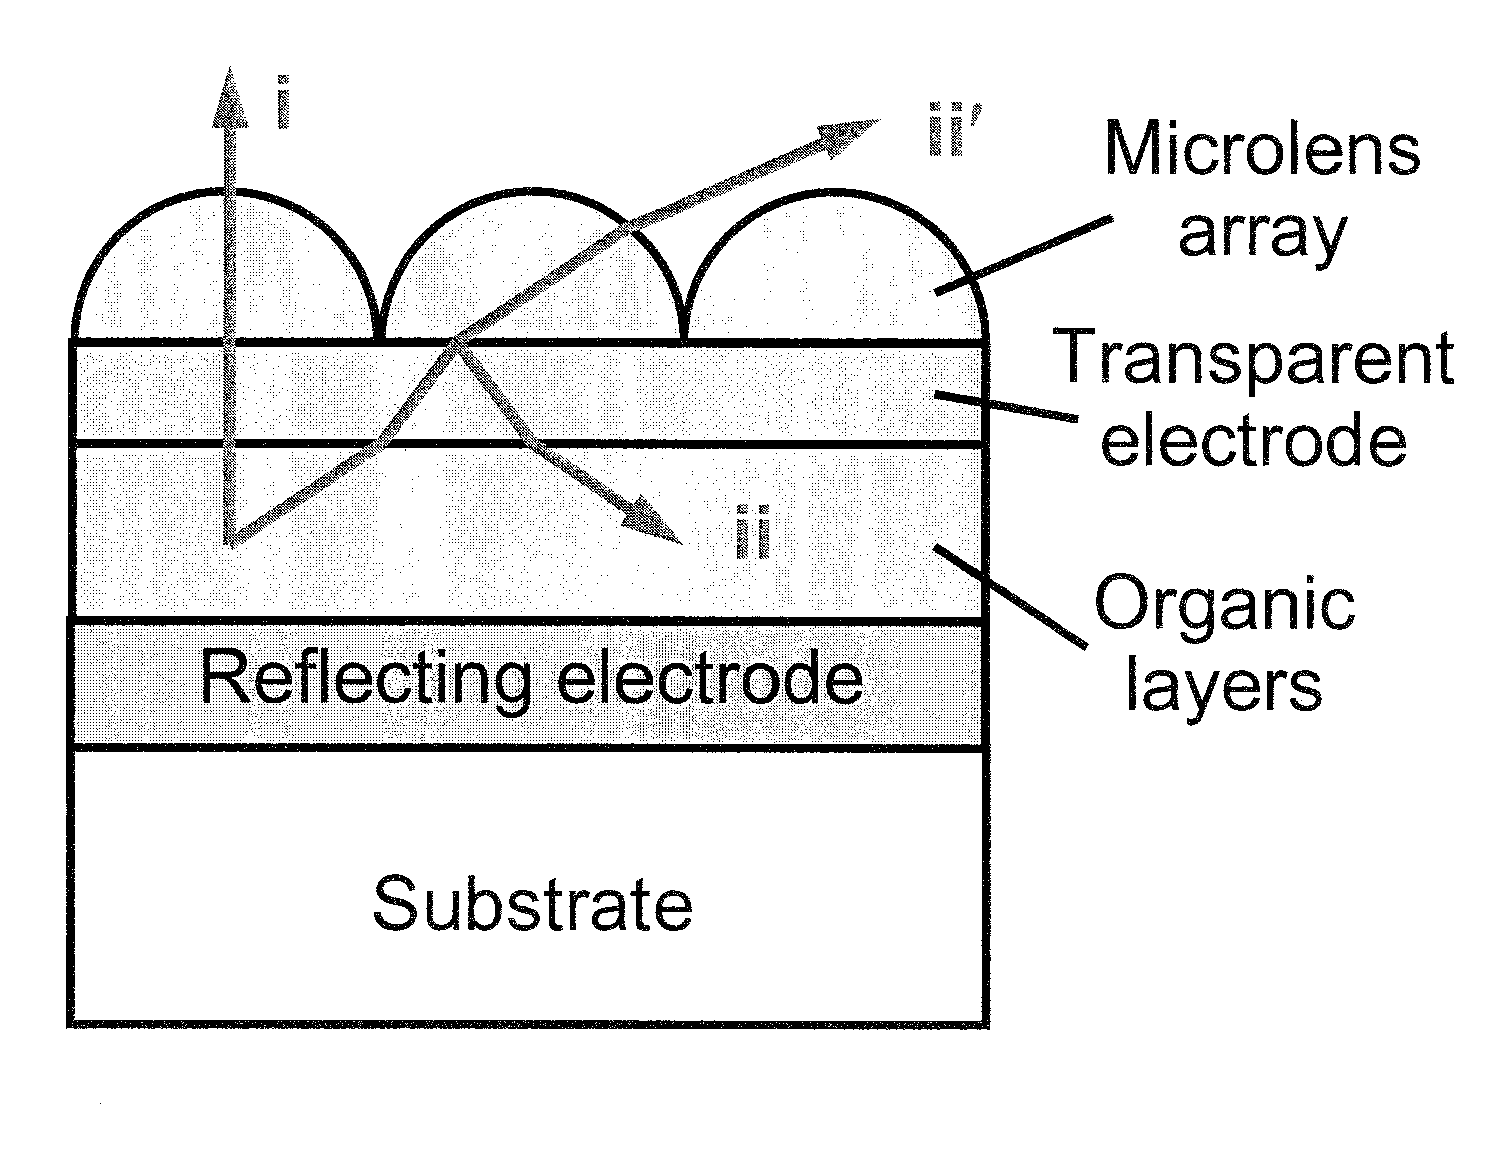 Top-Emission Organic Light-Emitting Devices with Microlens Arrays